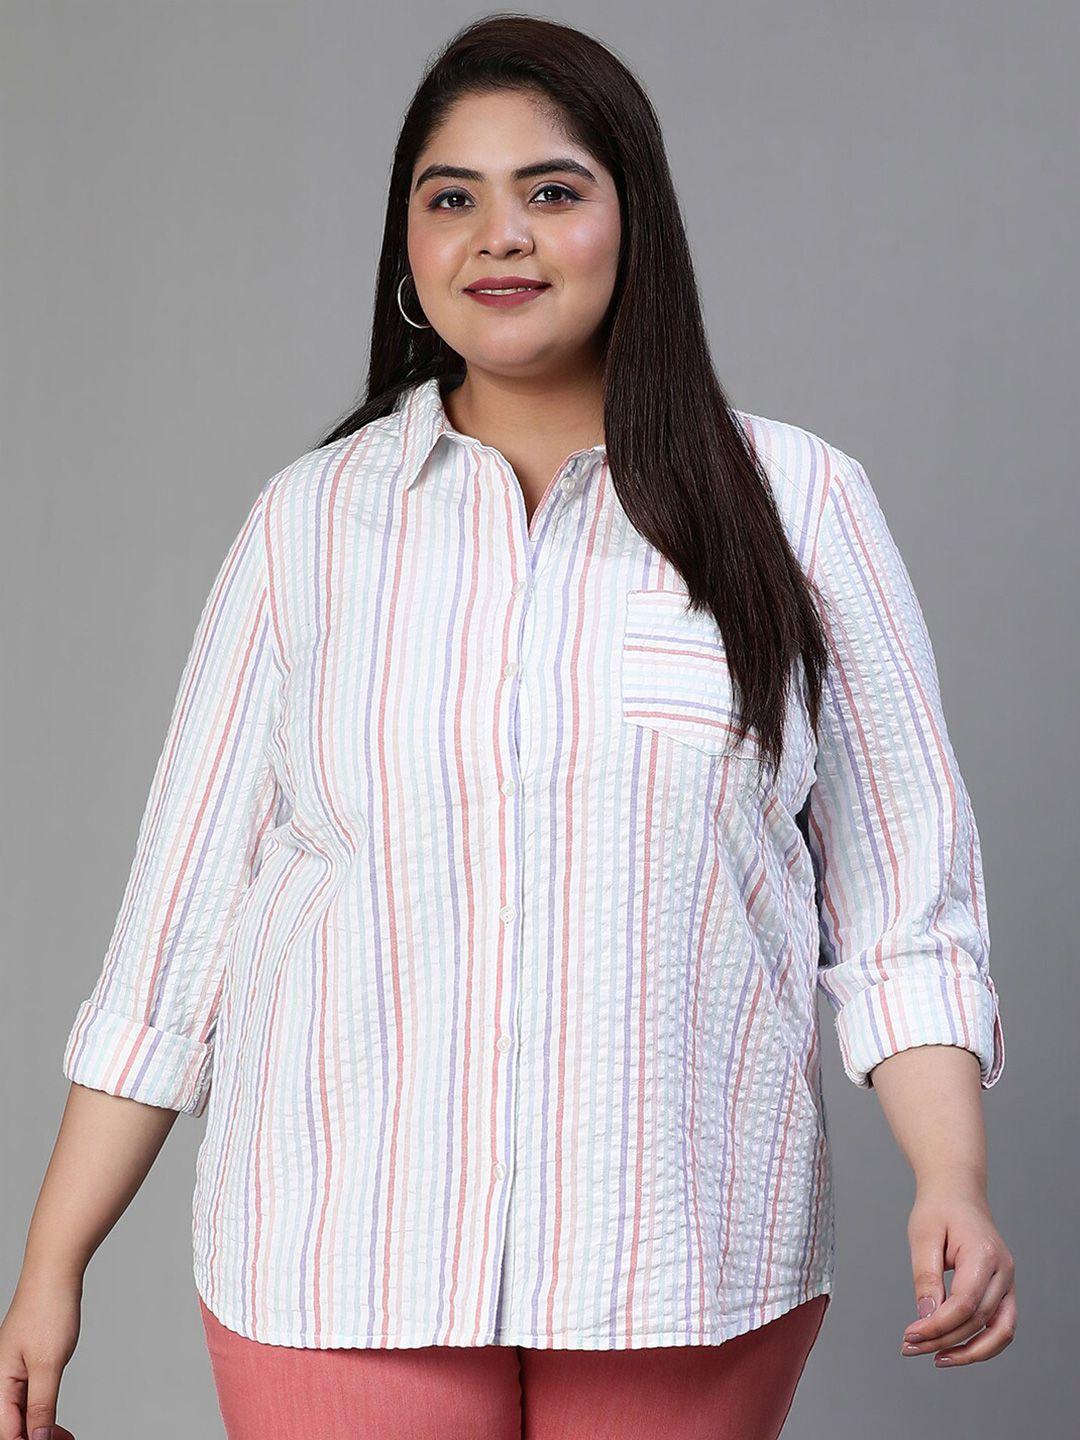 oxolloxo-relaxed-striped-seersucker-cotton-casual-shirt